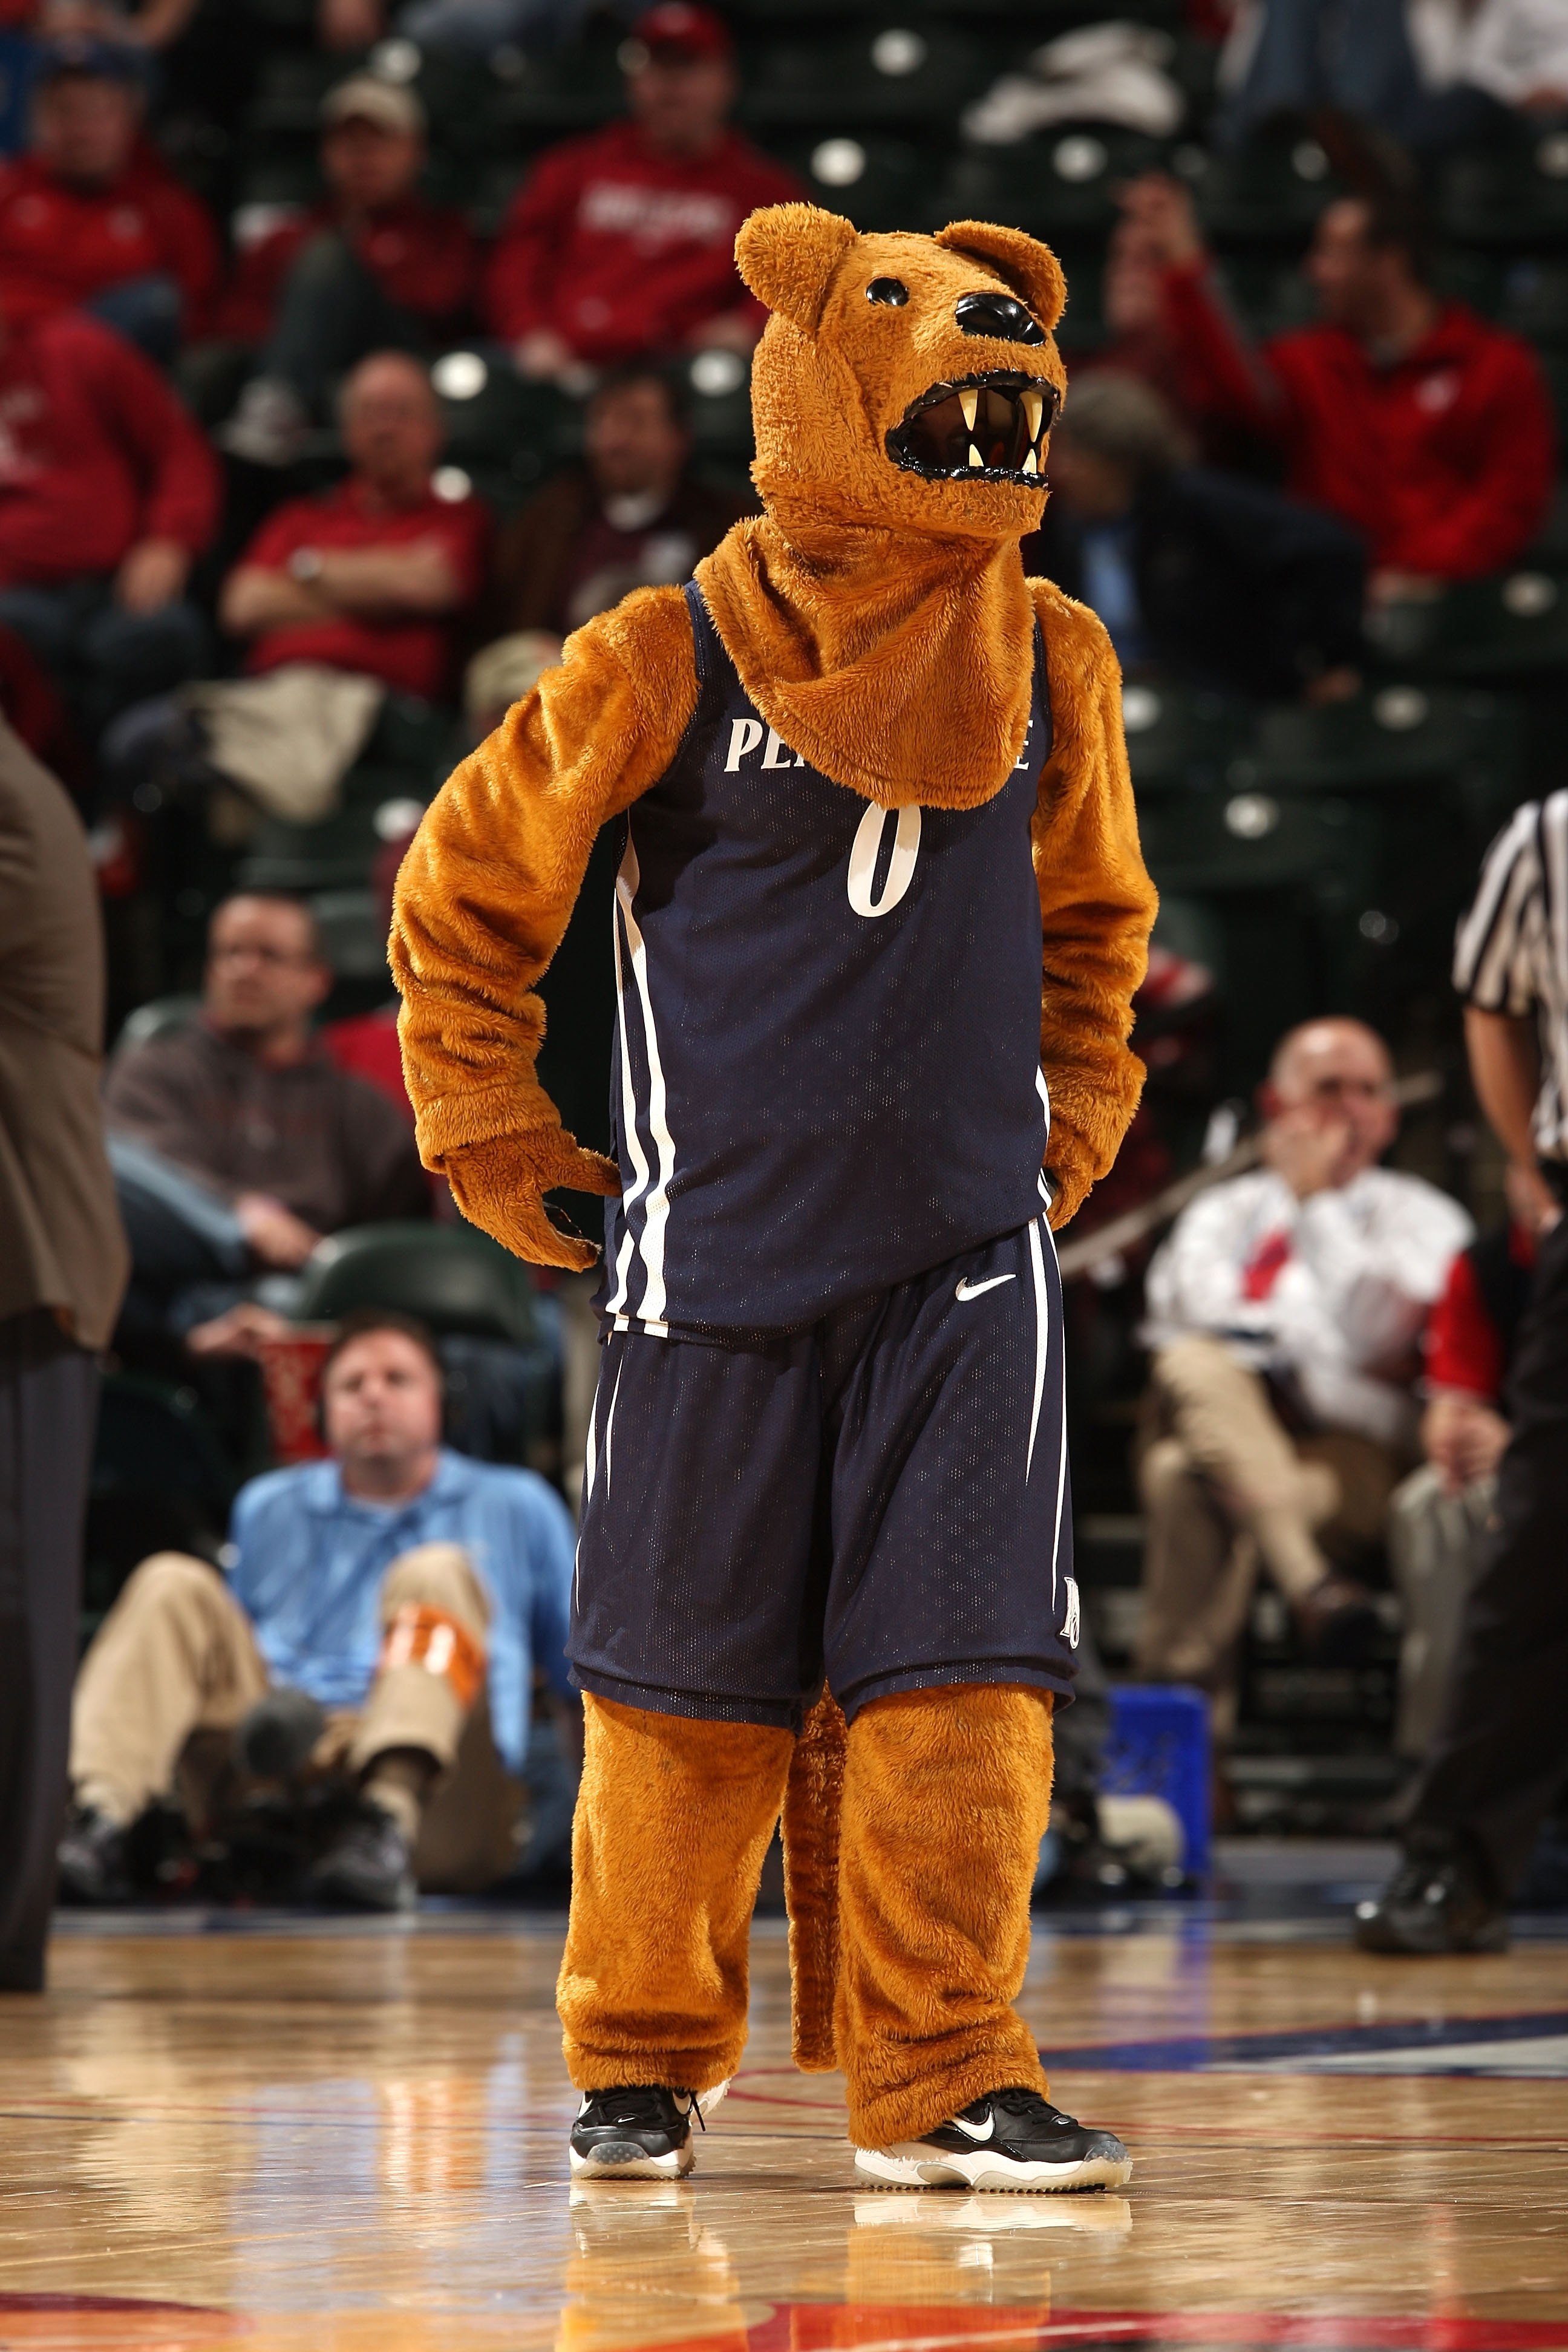 INDIANAPOLIS - MARCH 12:  The mascot for the Penn State Nittany Lions stands on court against the Indiana Hoosiers during the first round of the Big Ten Men's Basketball Tournament at Conseco Fieldhouse on March 12, 2009 in Indianapolis, Indiana.  (Photo